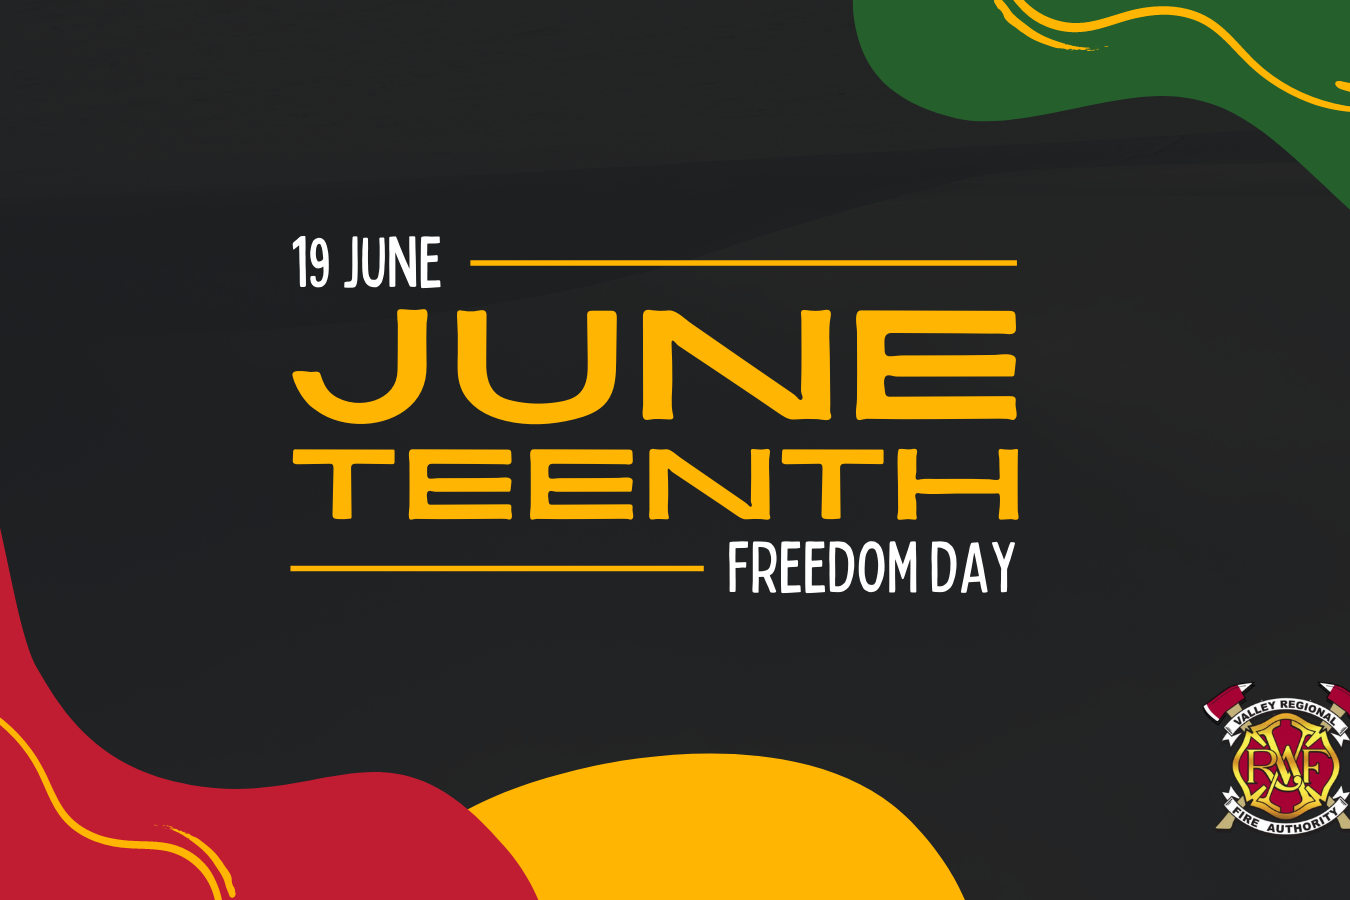 June tenth Freedom Day poster featuring Valley Regional Fire Authority service.